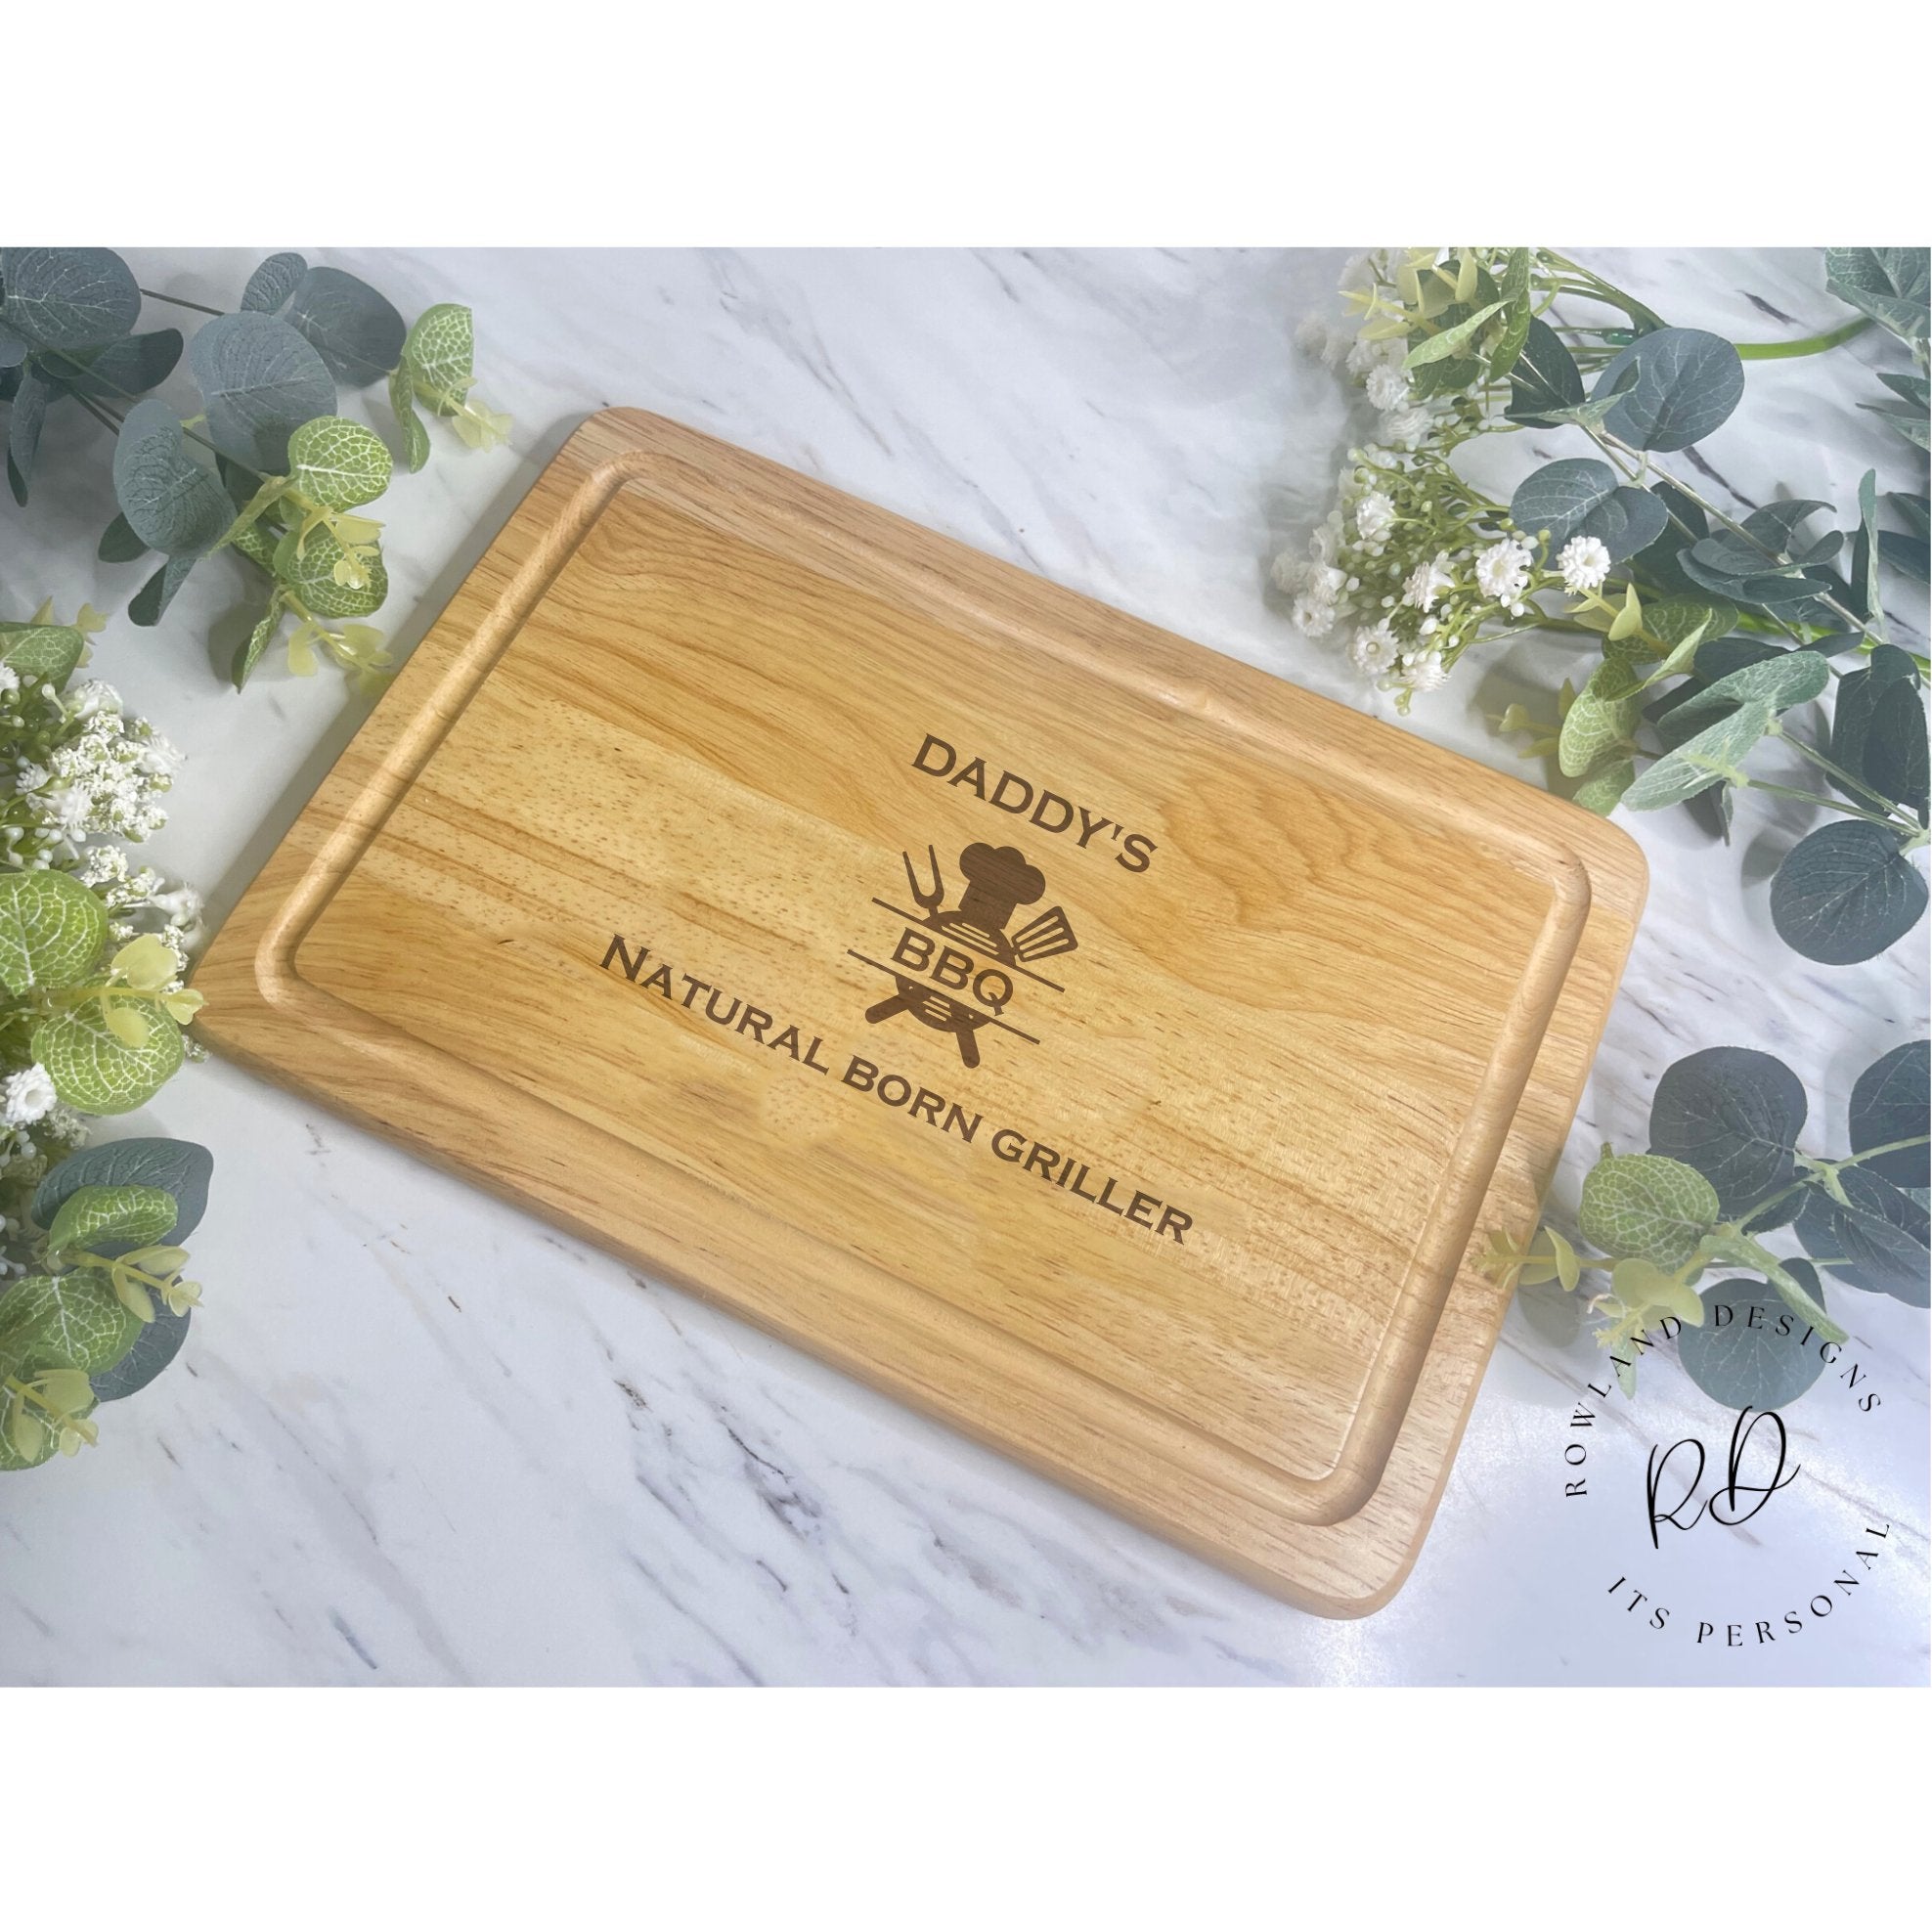 Elevate your cooking prowess with our Personalised Chopping Board - Natural Born Griller. Engraved with your chosen name and a timeless BBQ image, this thoughtful gift is perfect for Christmas, birthdays, or special celebrations. Crafted with care from high-quality Hevea wood, laser-engraved for lasting quality. Dimensions: 300mm x 200mm. Please note: “Natural Born Griller” is not personalizable. Hand-wash only for enduring charm.